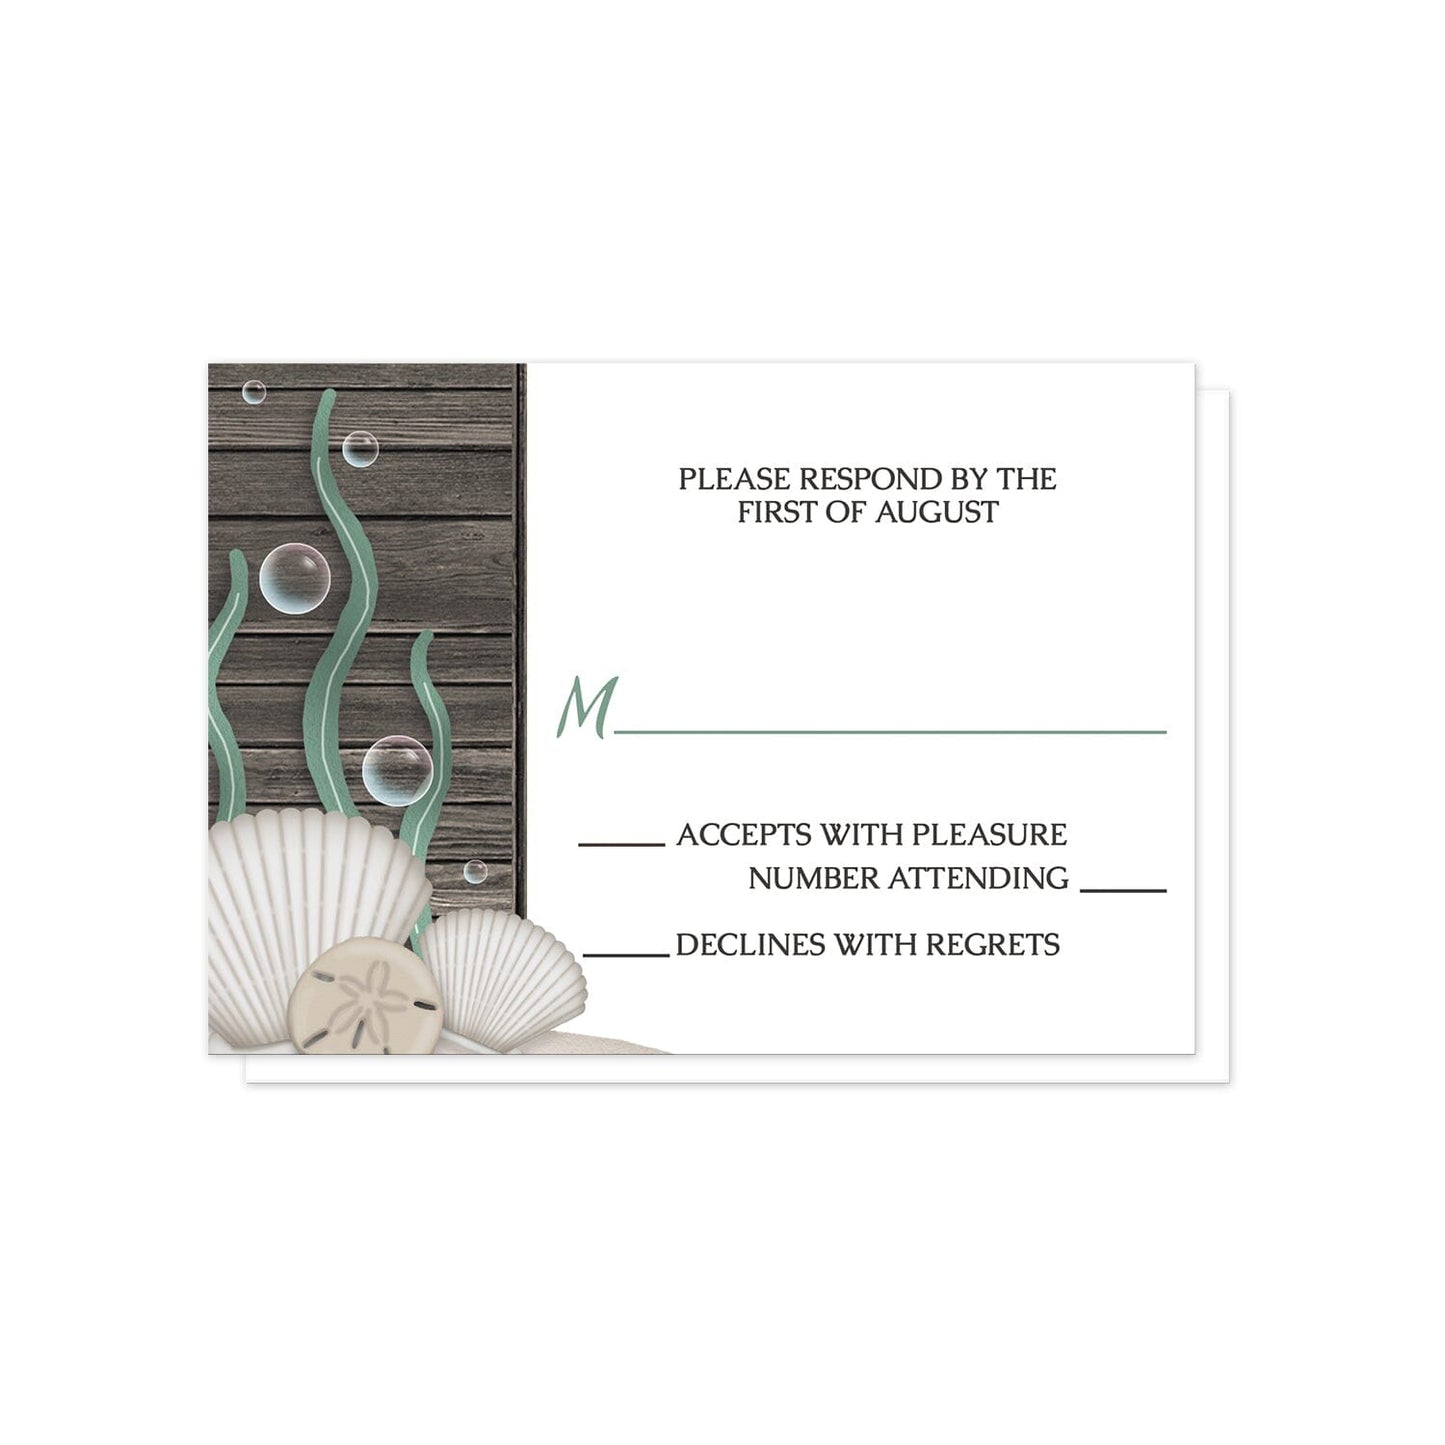 Rustic Beach Seashells and Wood RSVP Cards at Artistically Invited.